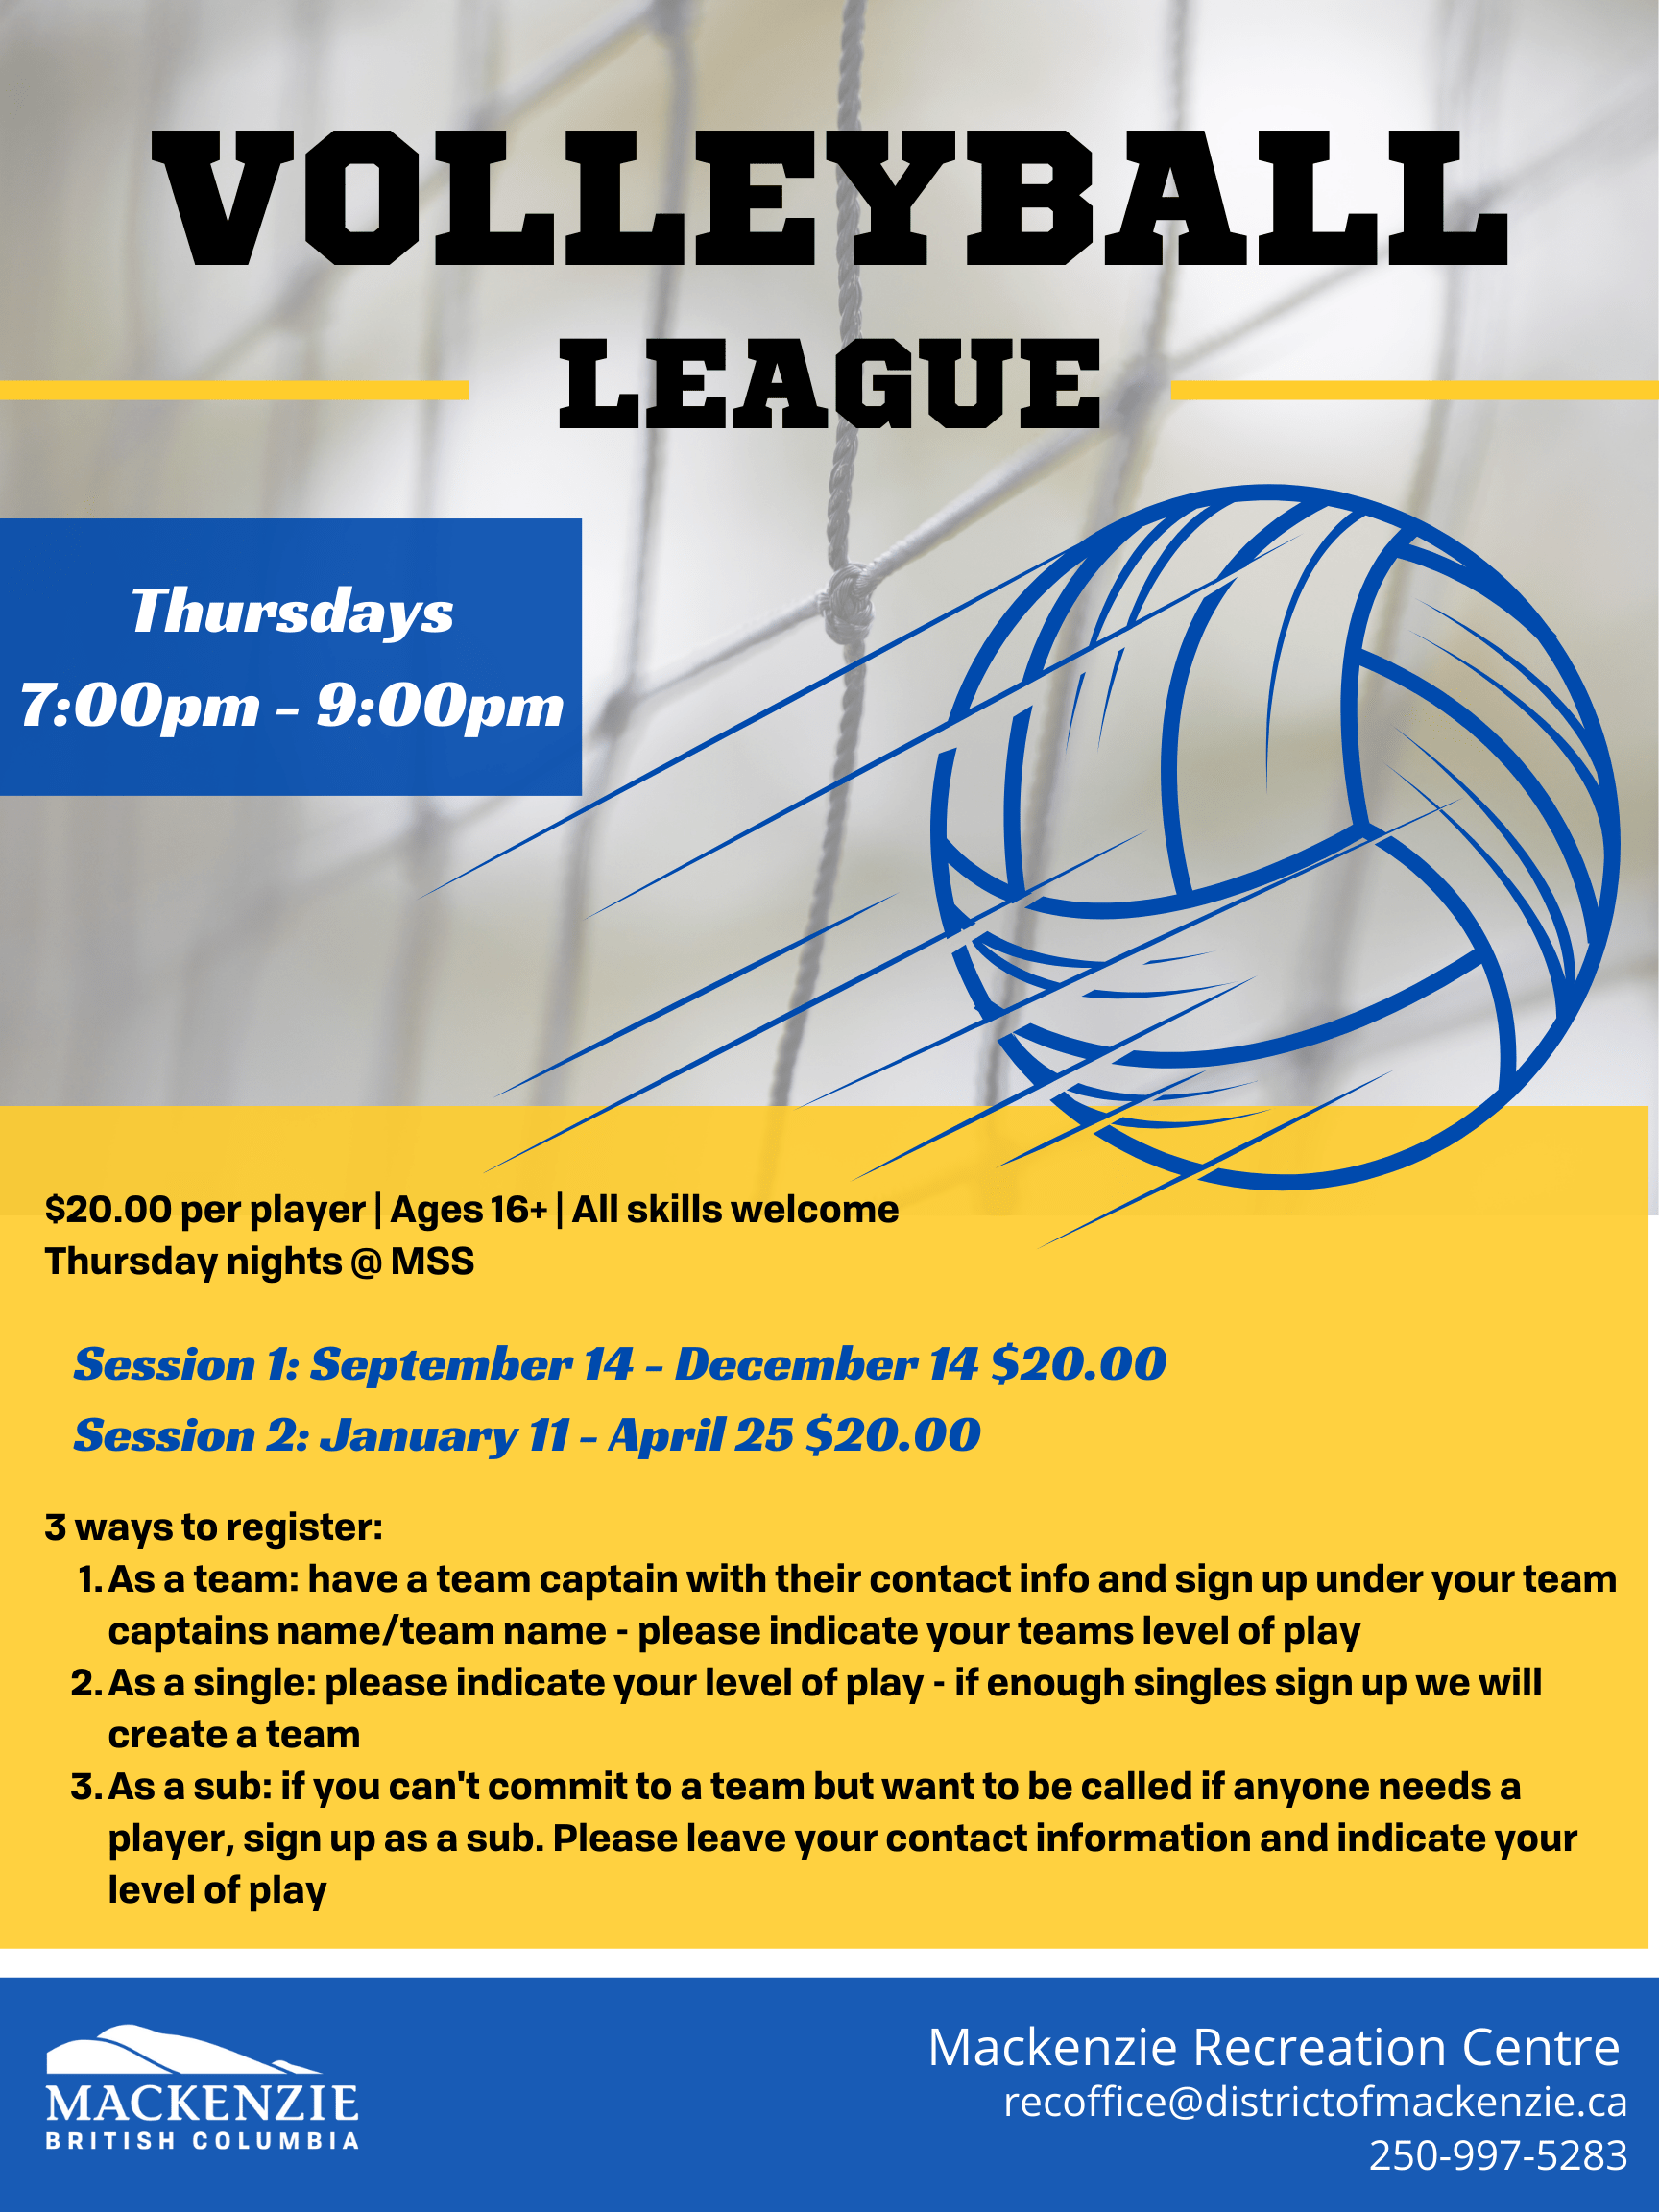 Adult Leagues: Volleyball